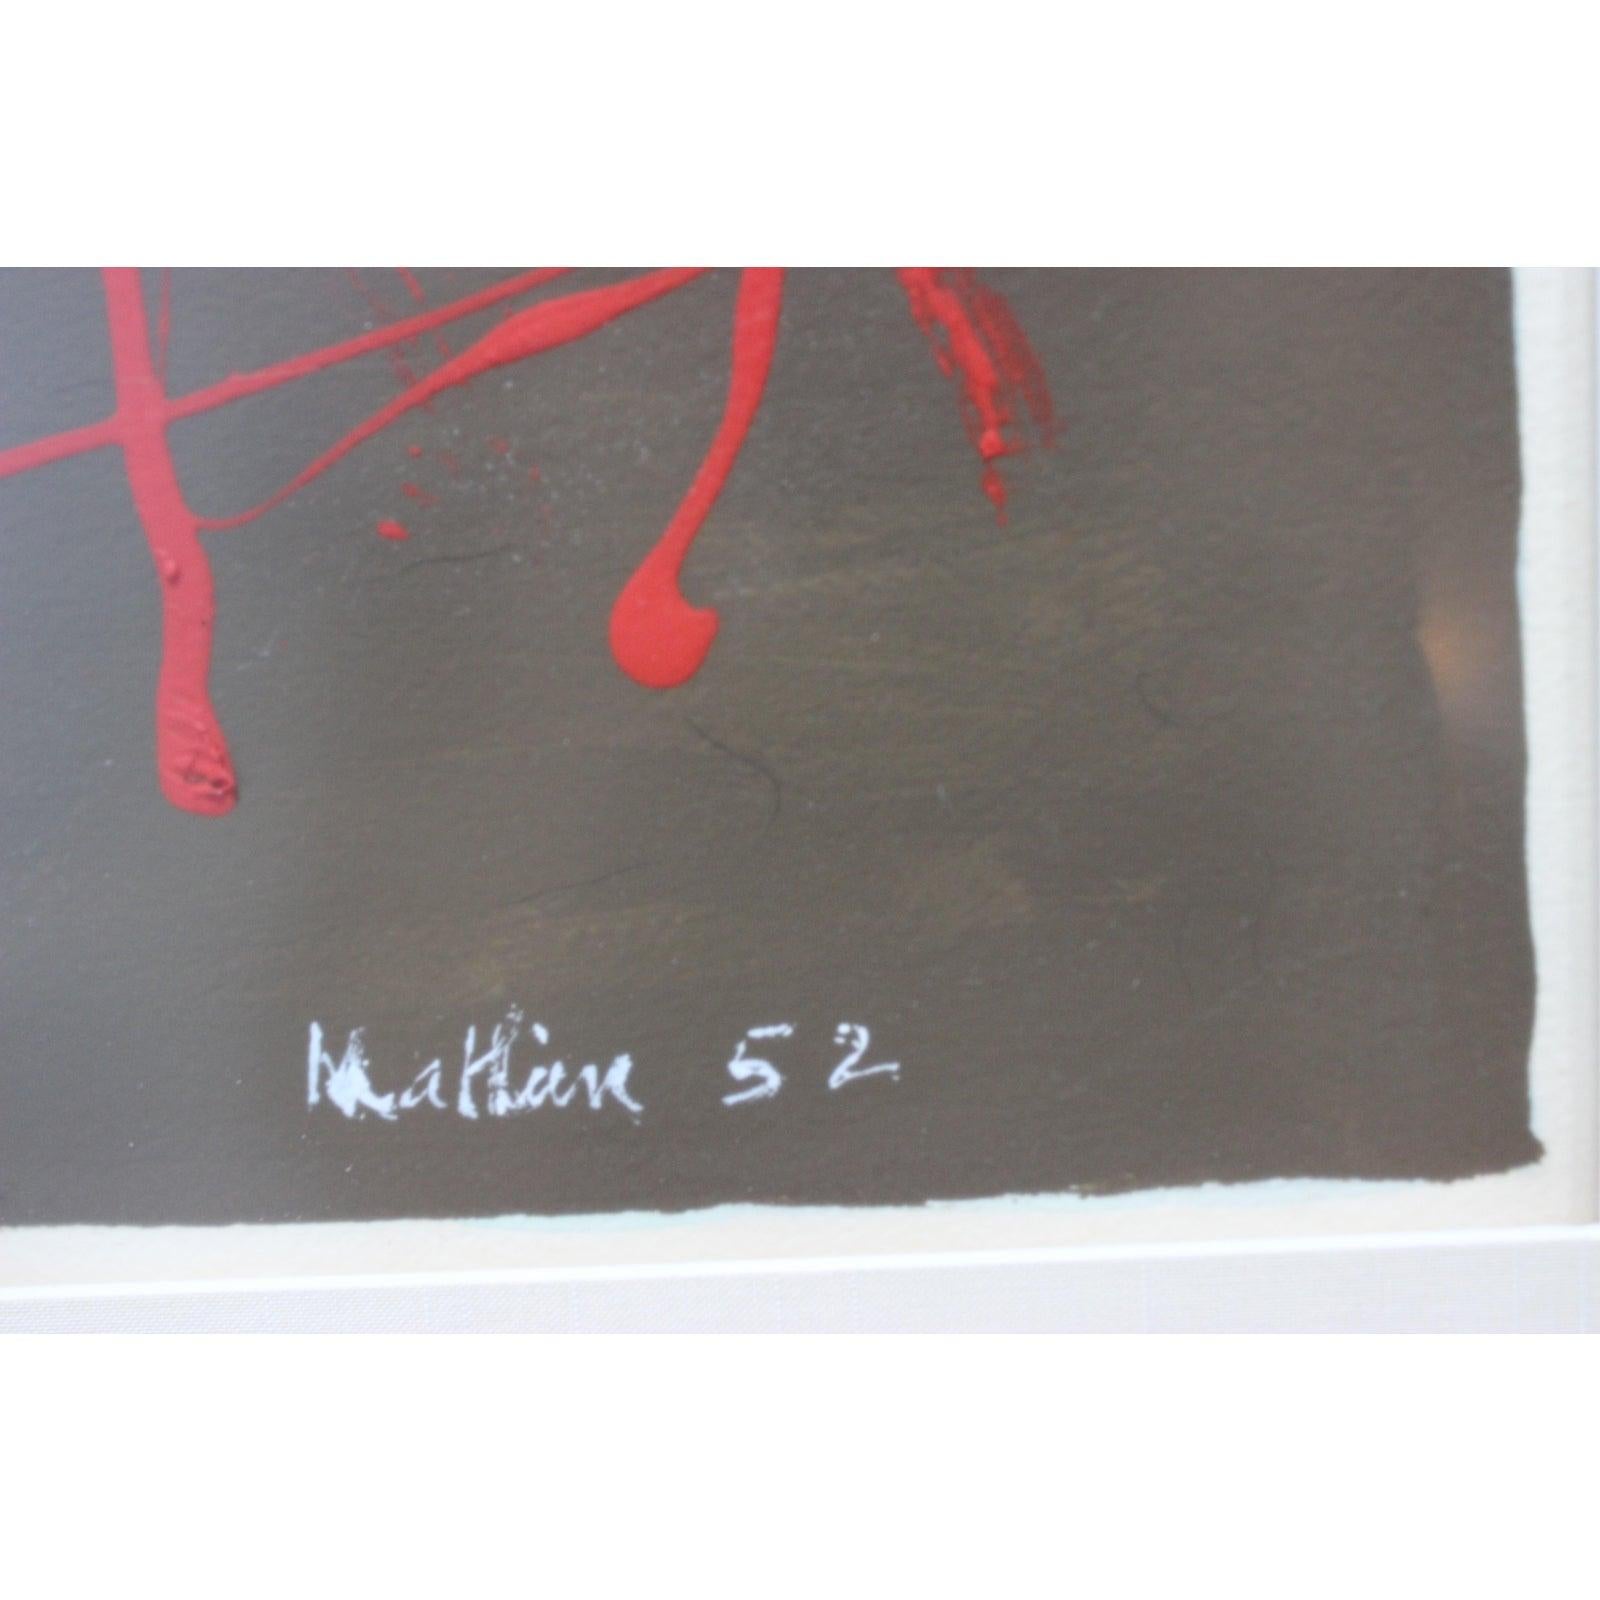 Georges Mathieu Drip Abstract Tachism Painting For Sale 4